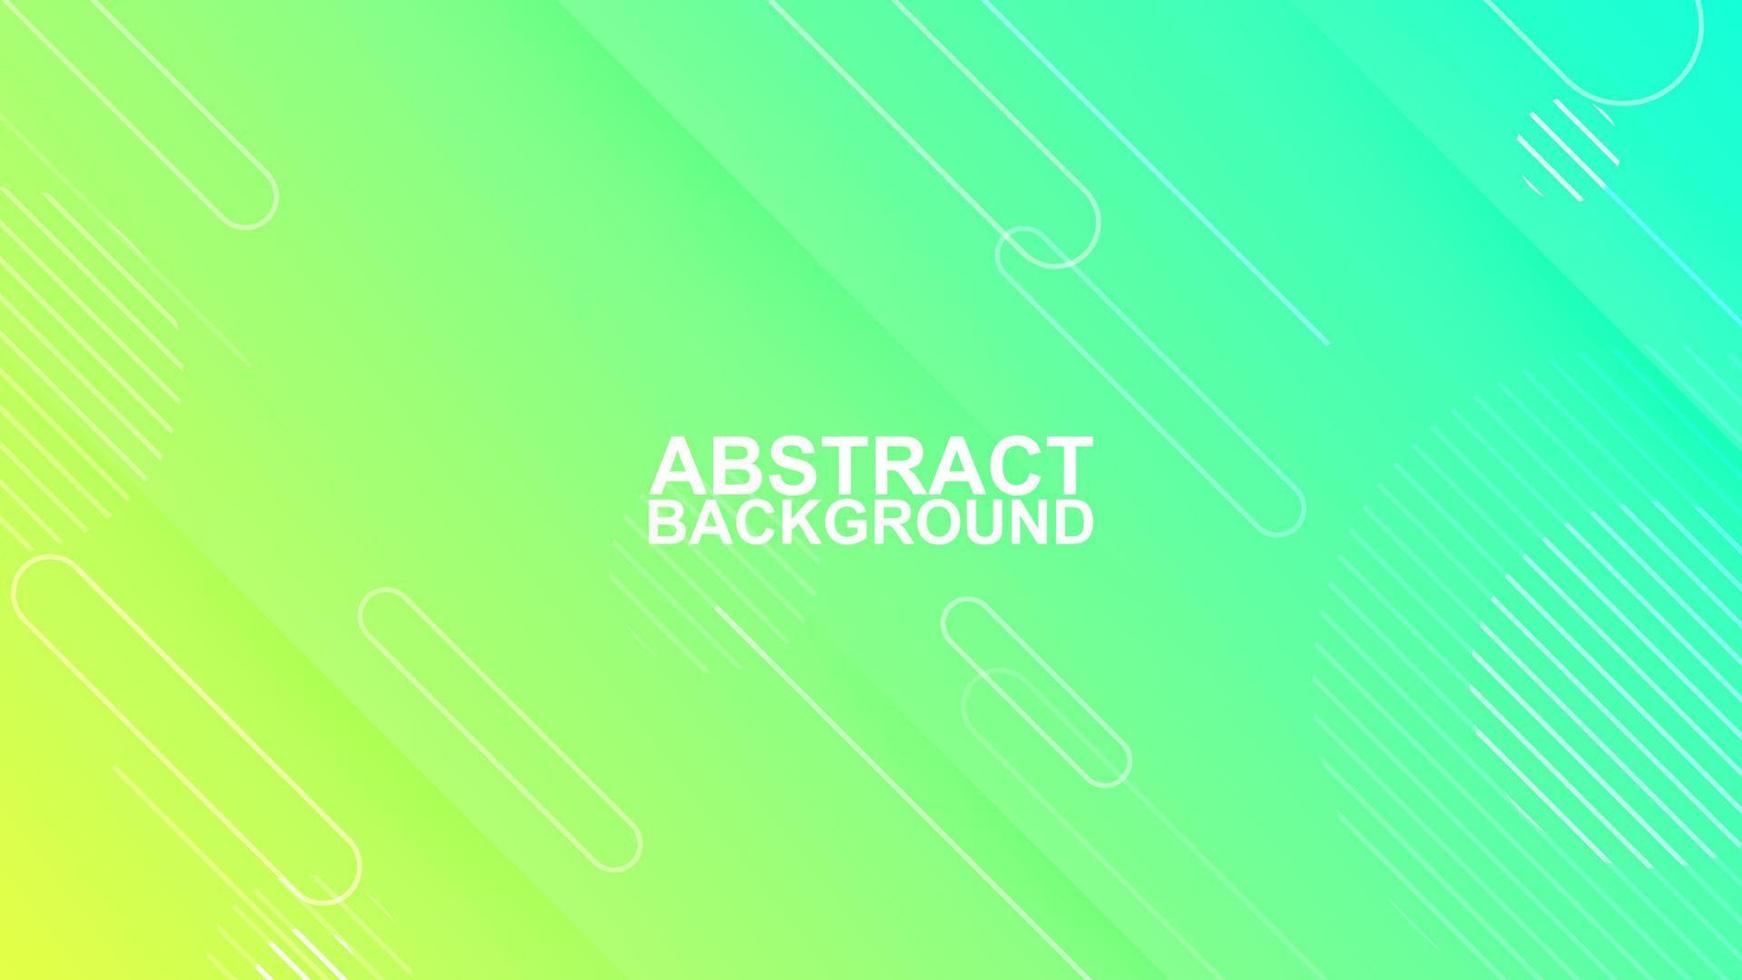 abstract modern design volt and mint green color background with line and triangle shape. for web, landing page, ads, presentation background. vector illustrations EPS10